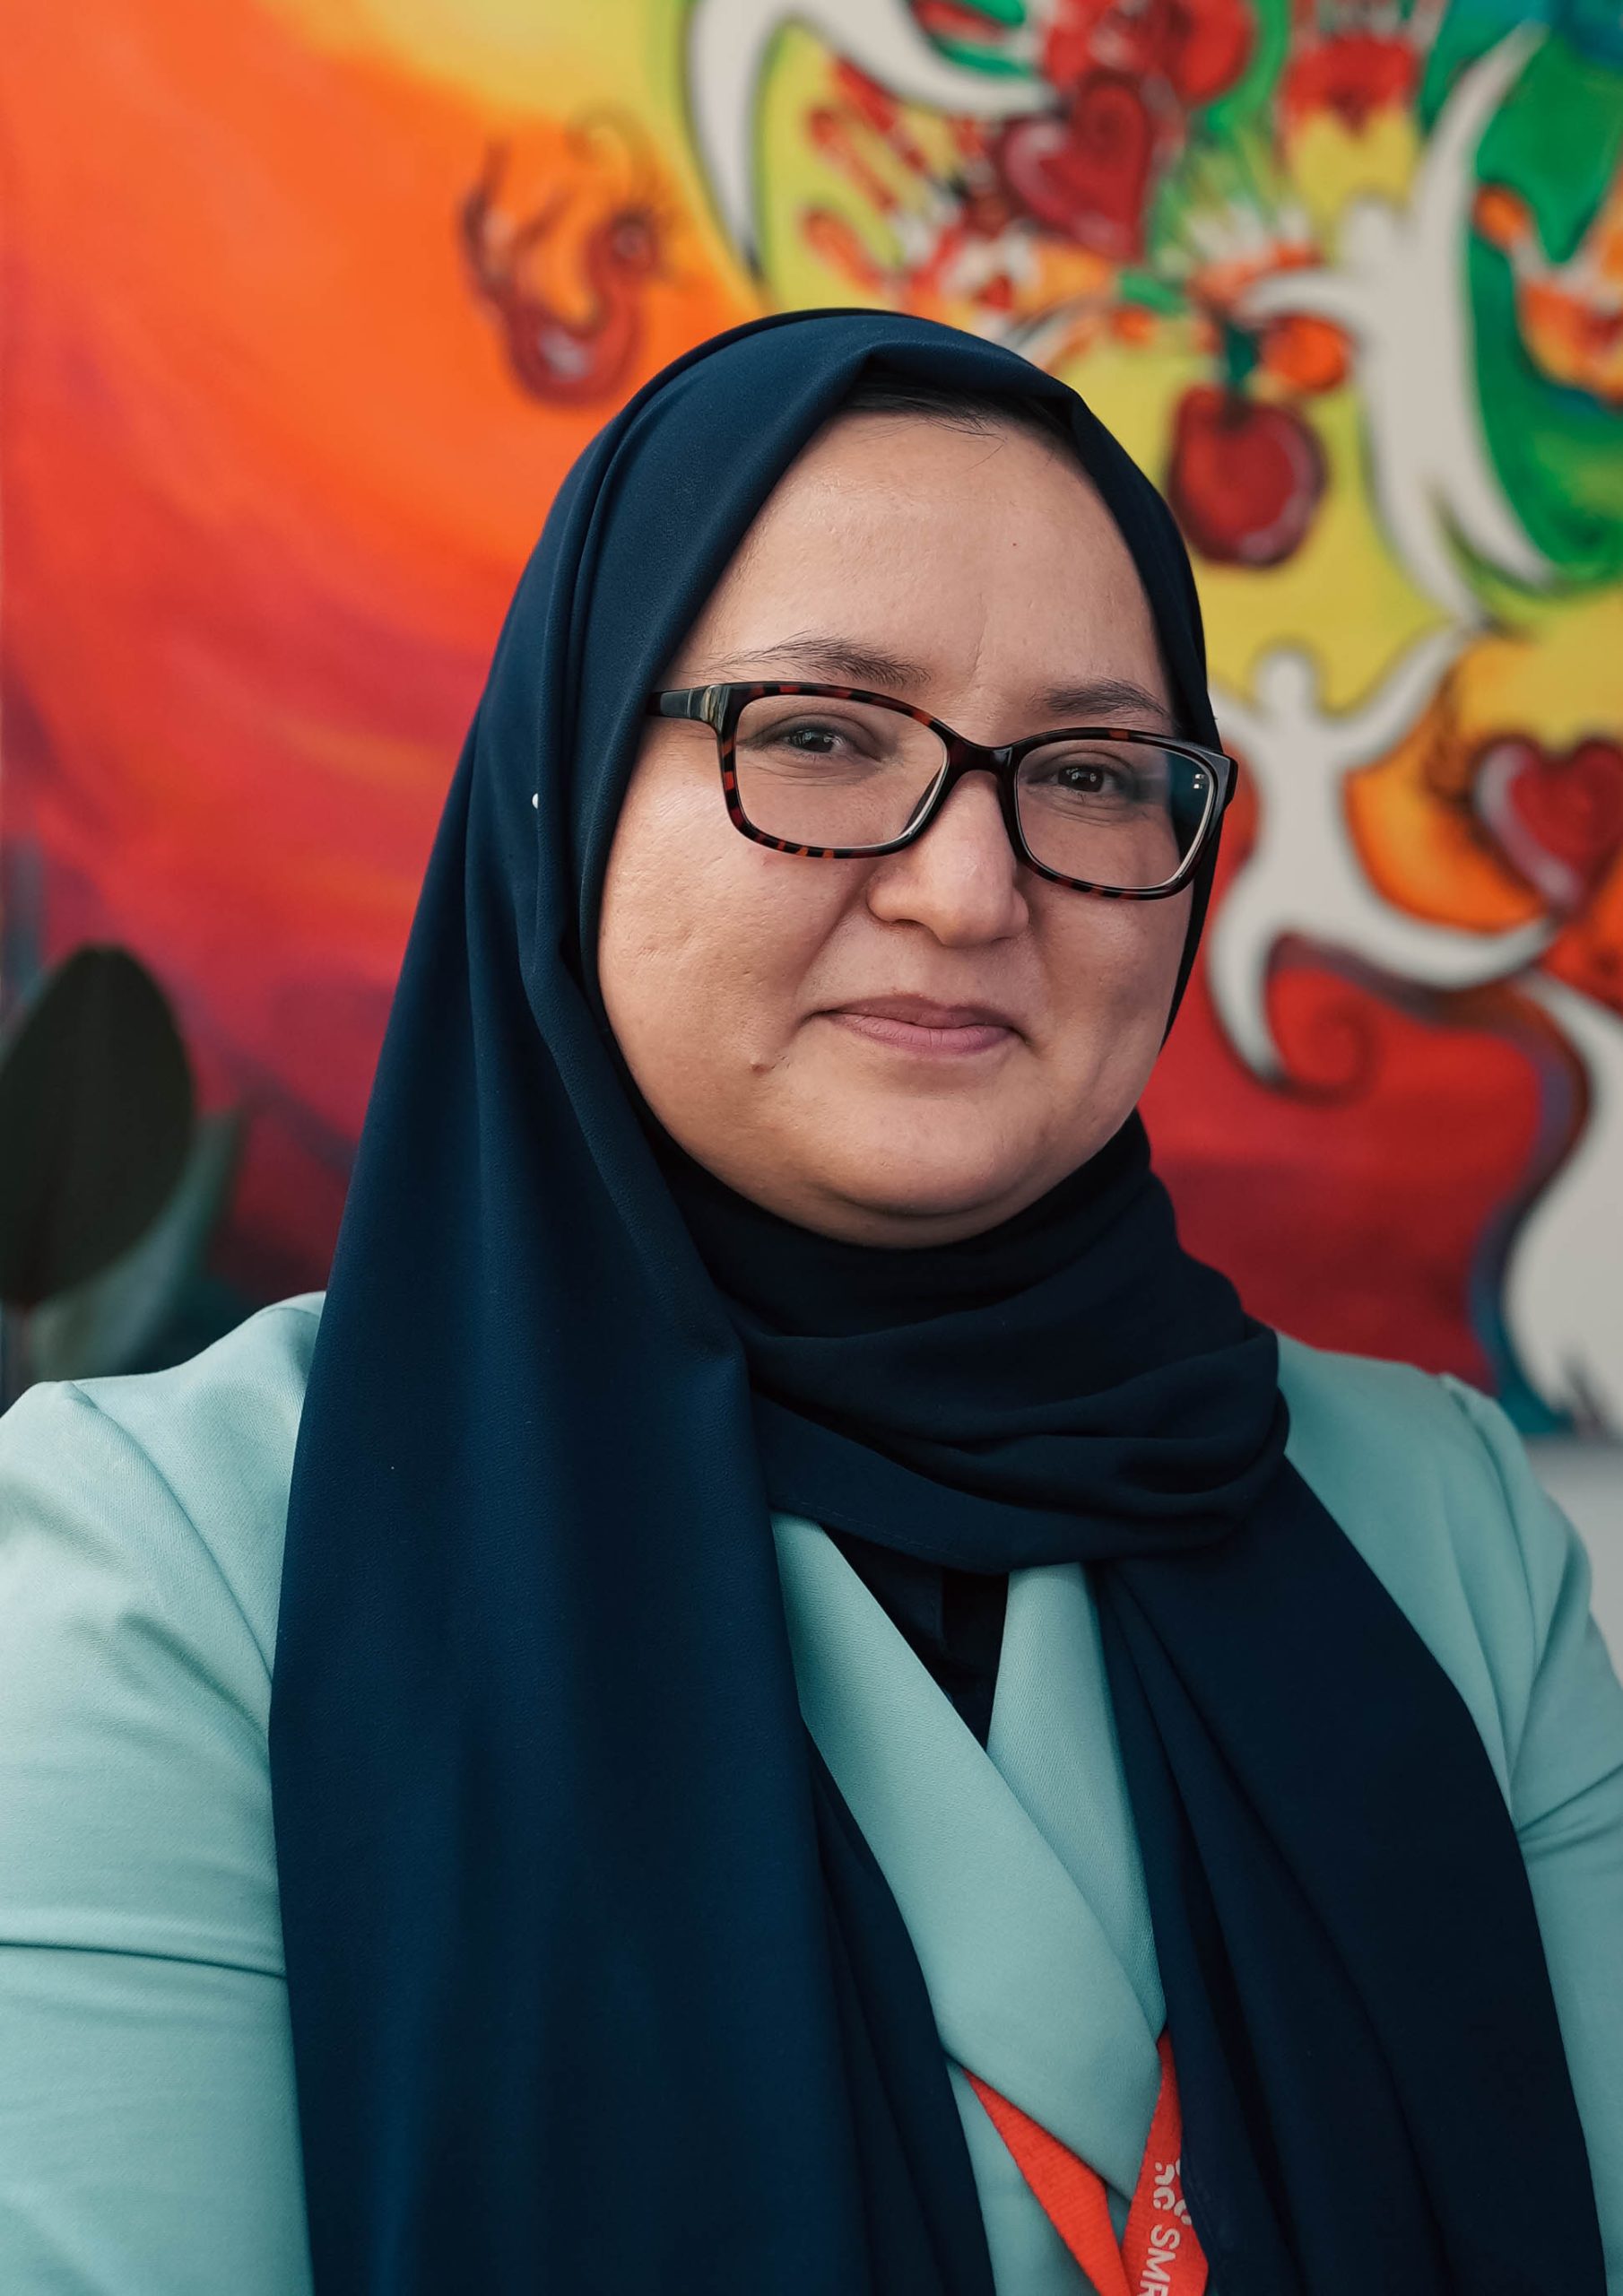 Najma's journey from SMRC client to Community Development and Bicultural Program Support Worker